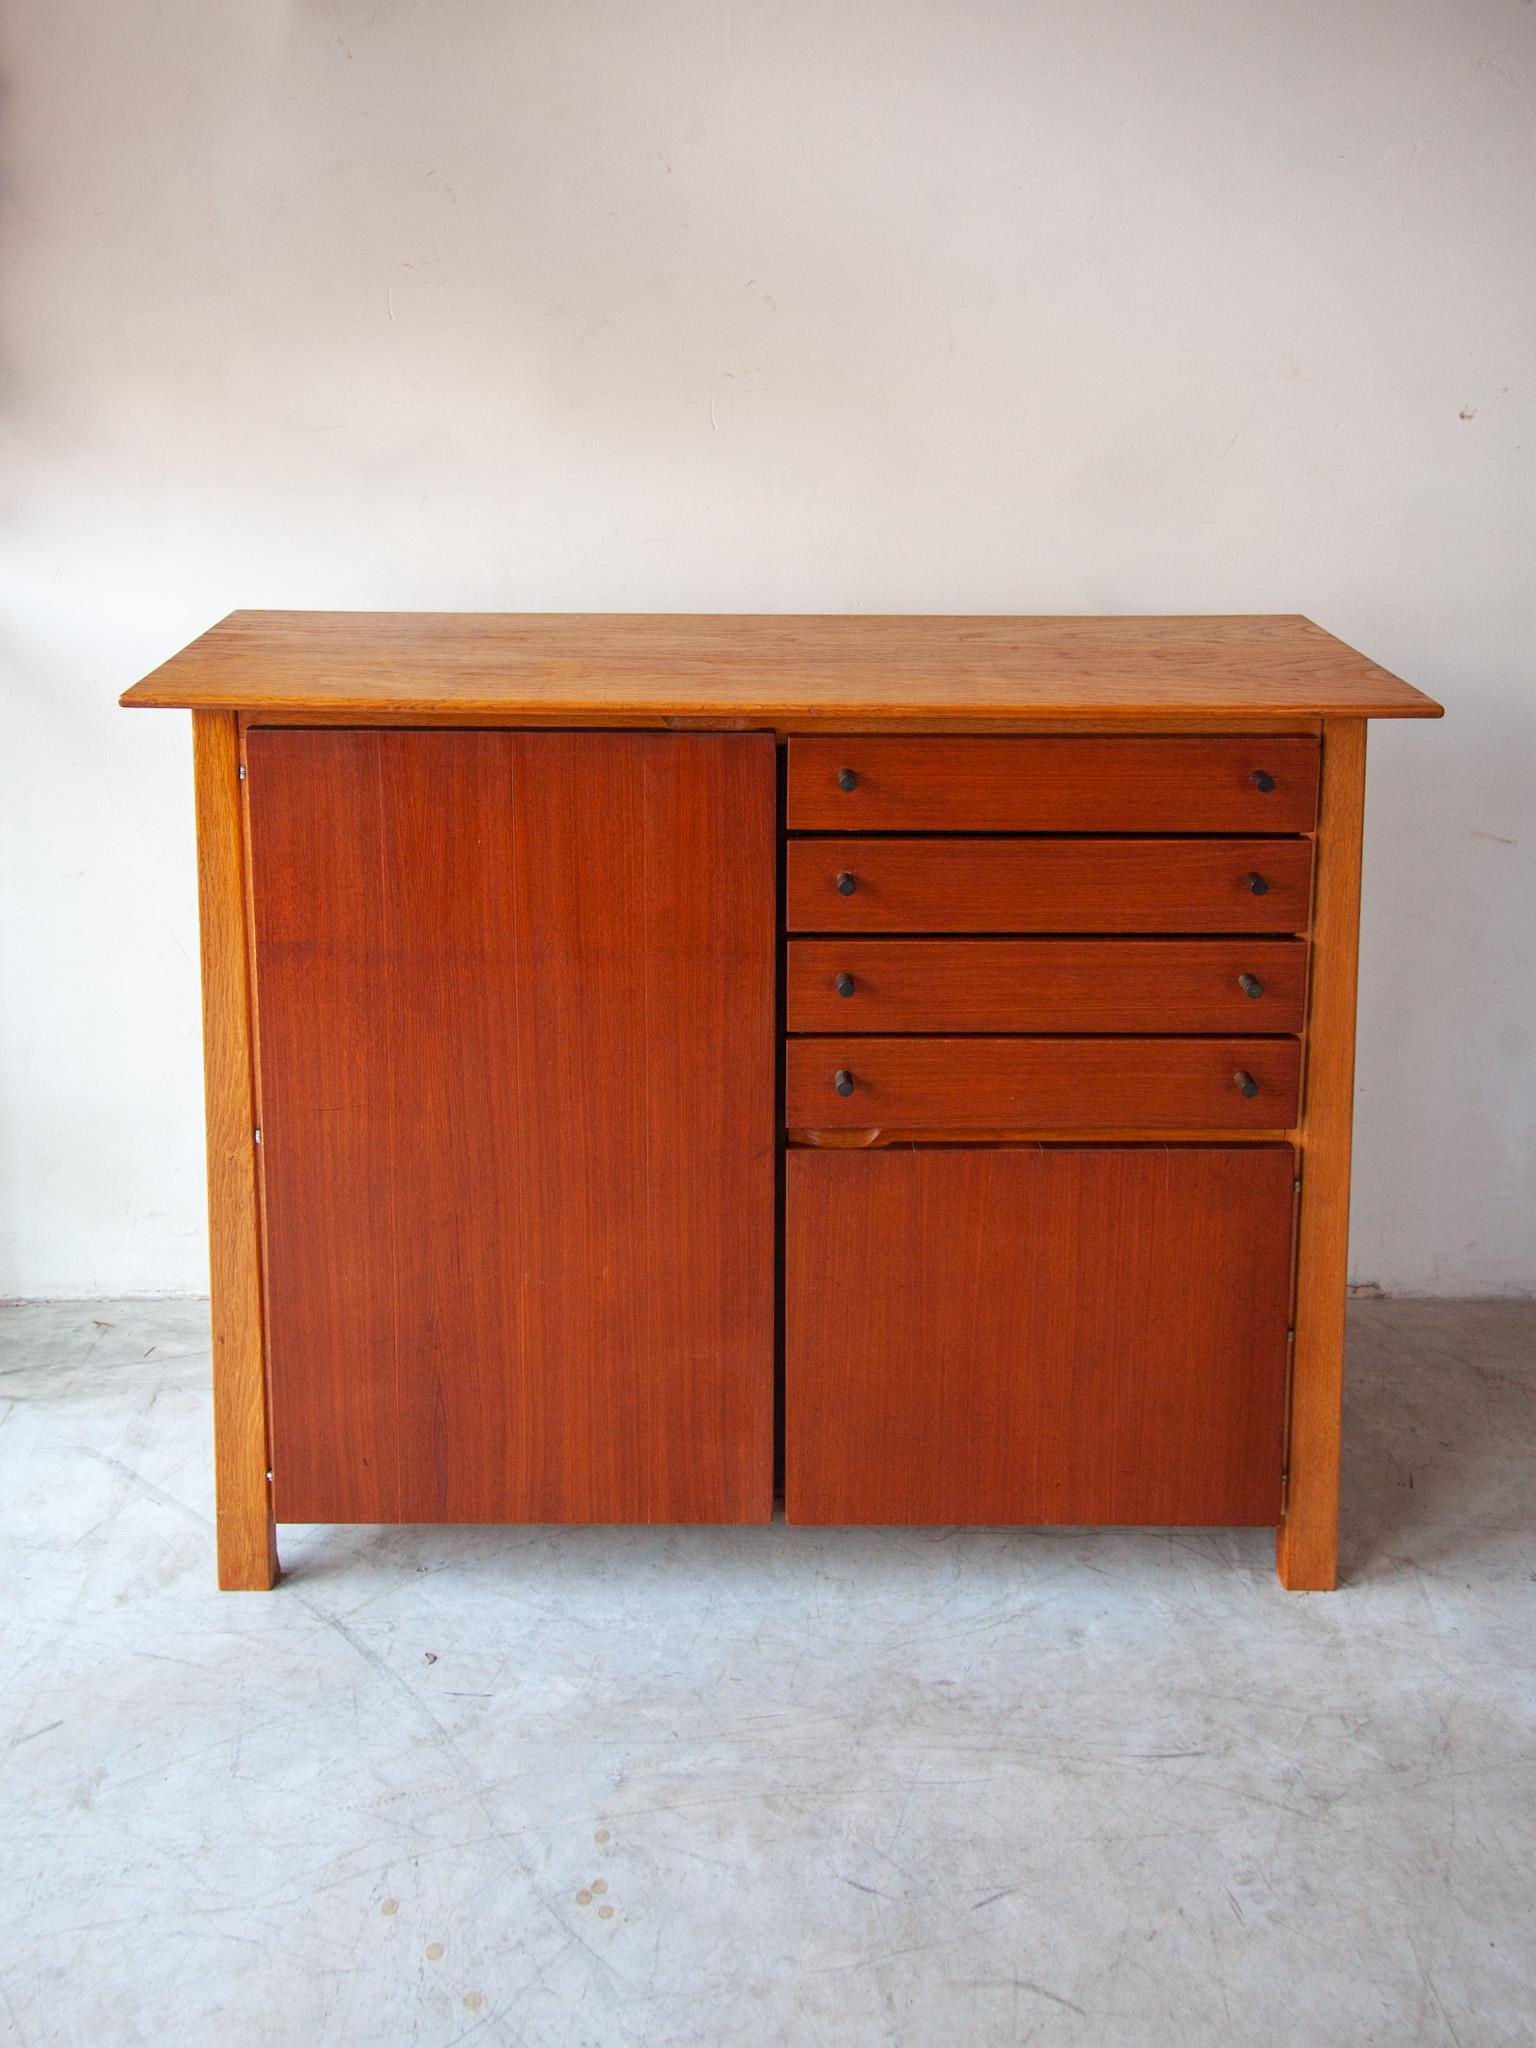 Mid-Century Modern cabinet with drawers, bar sideboard insight and dark accent teak, Denmark, designed 1961.
Dimensions:Width 130cm-Dept 42 cm- Height 102 cm